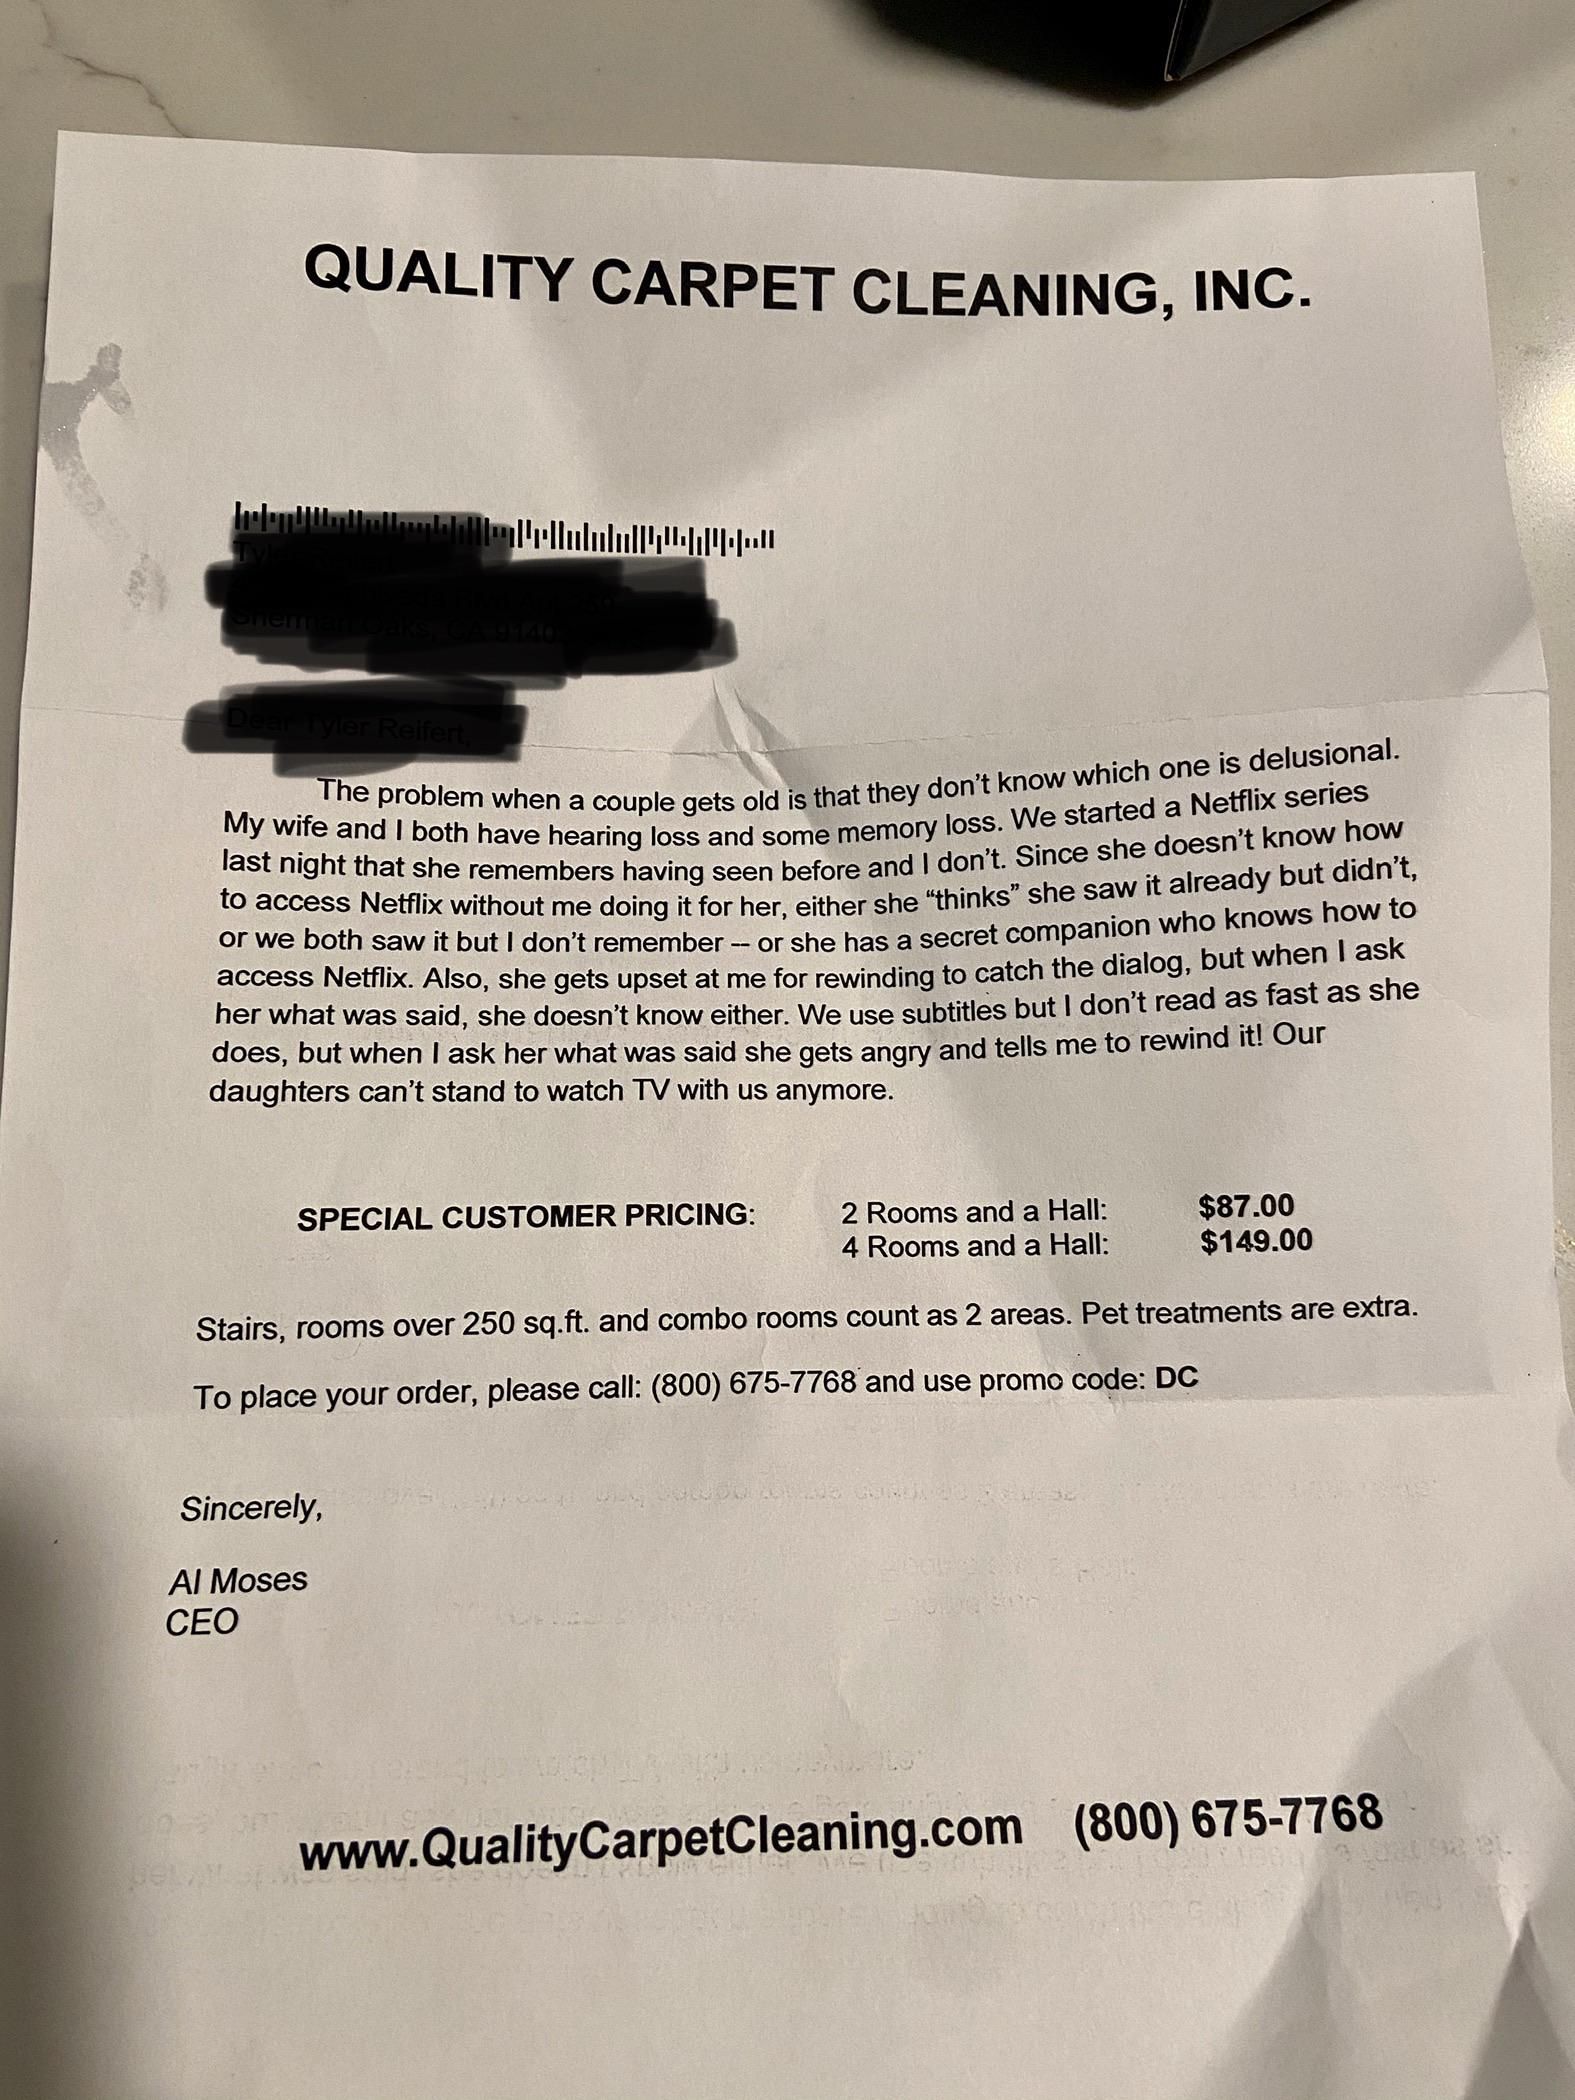 The carpet cleaners send an annual letter to its customers. This is the one I received today